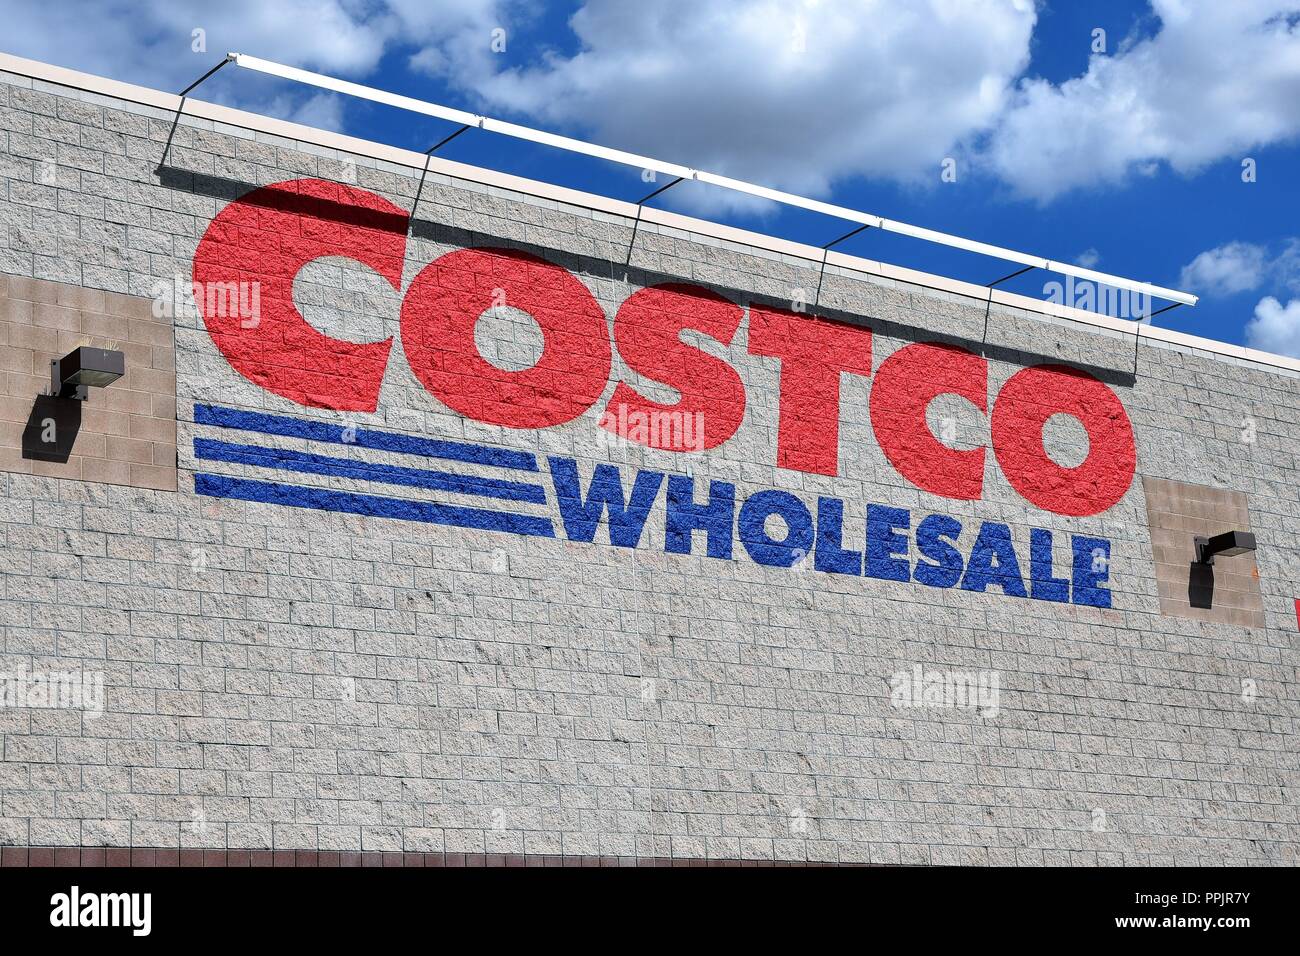 Costco wholesale warehouse sign against a blue sky Stock Photo